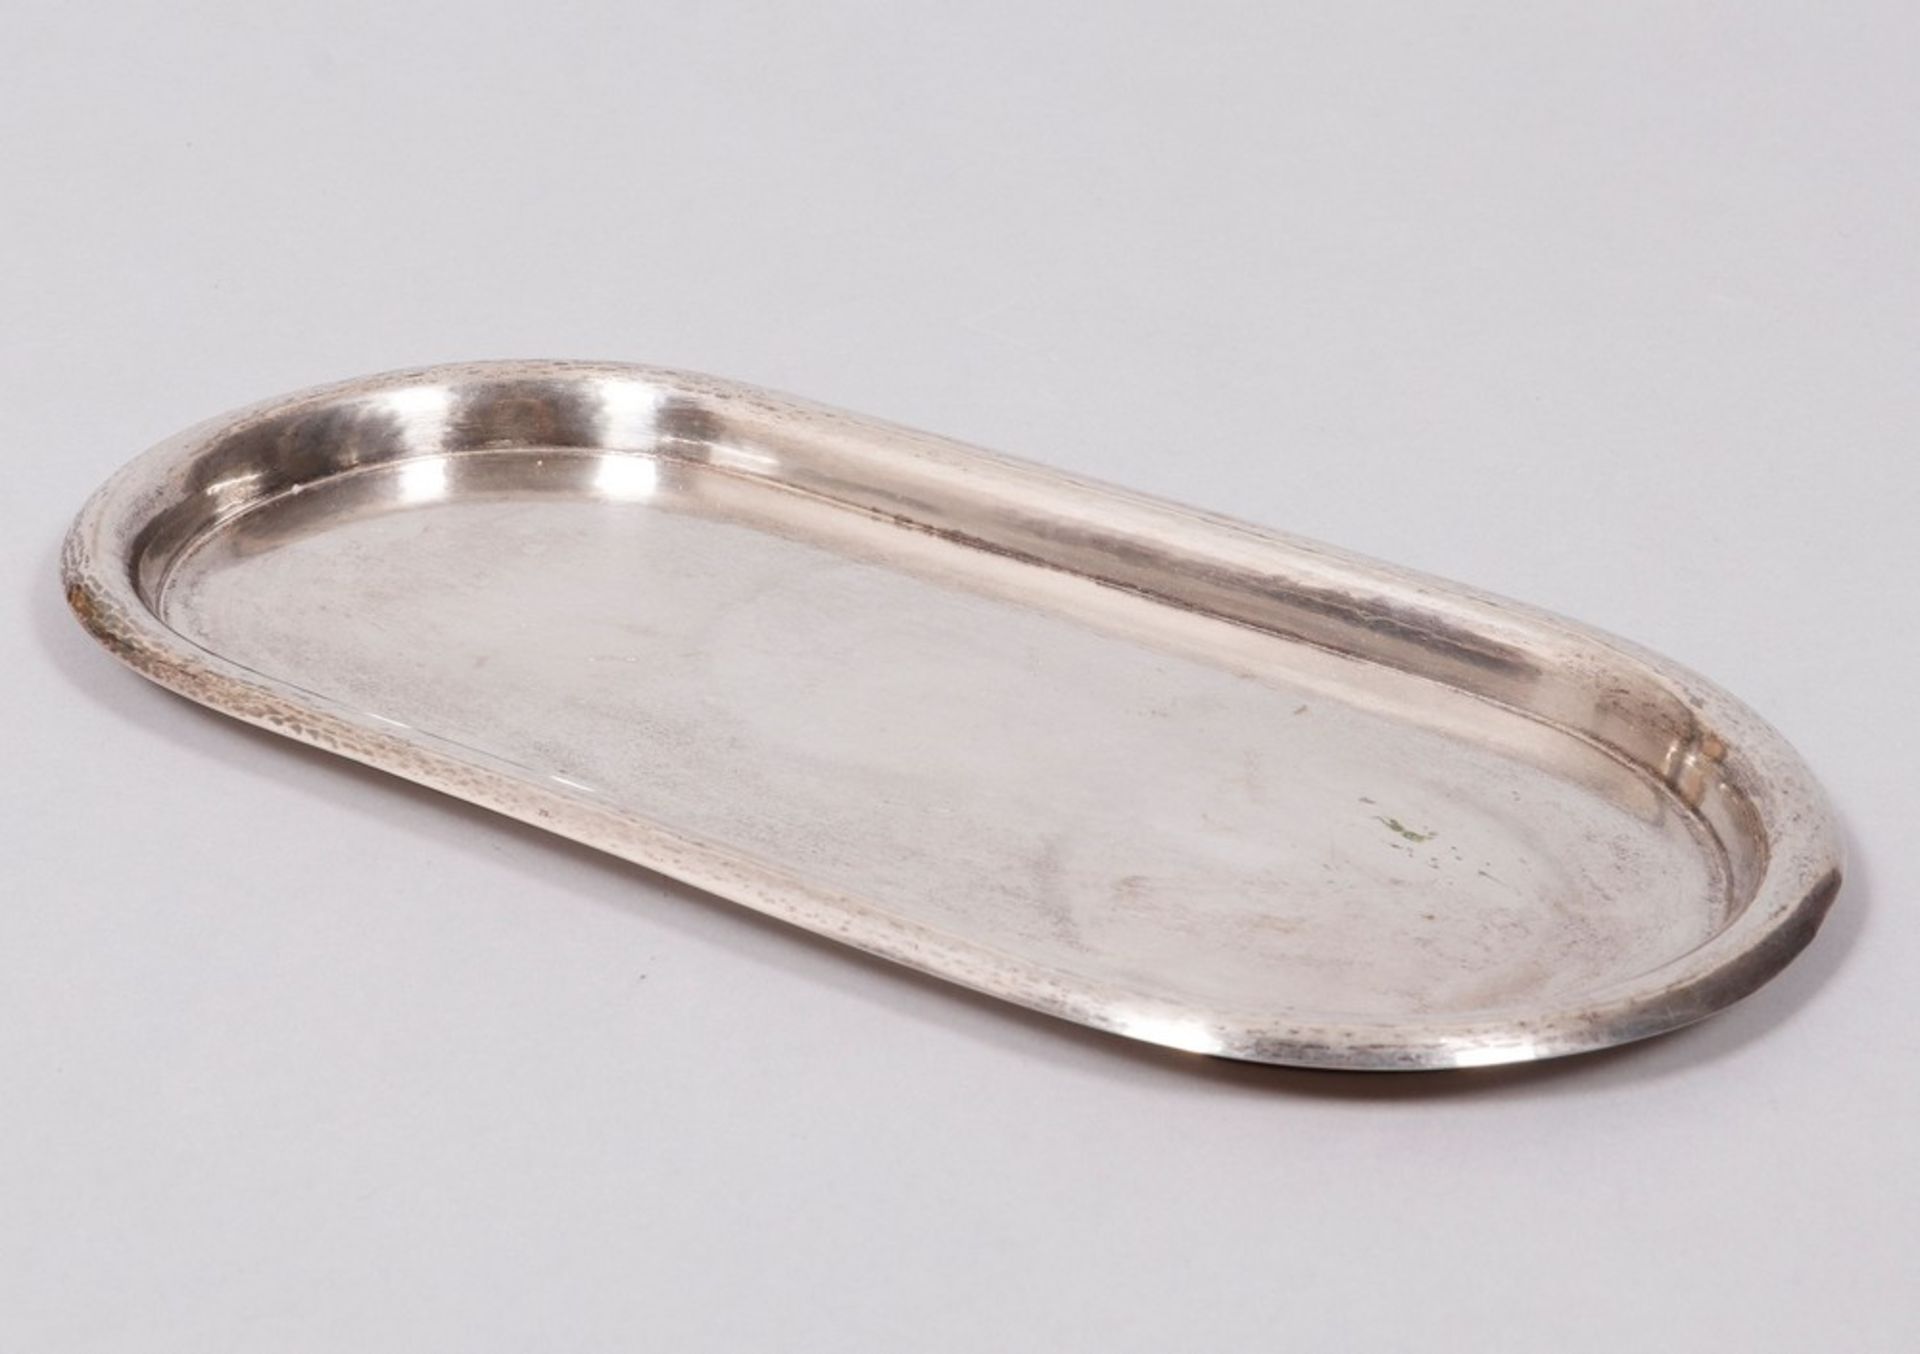 Small oval tray, 800 silver, German, 20th C. - Image 2 of 4